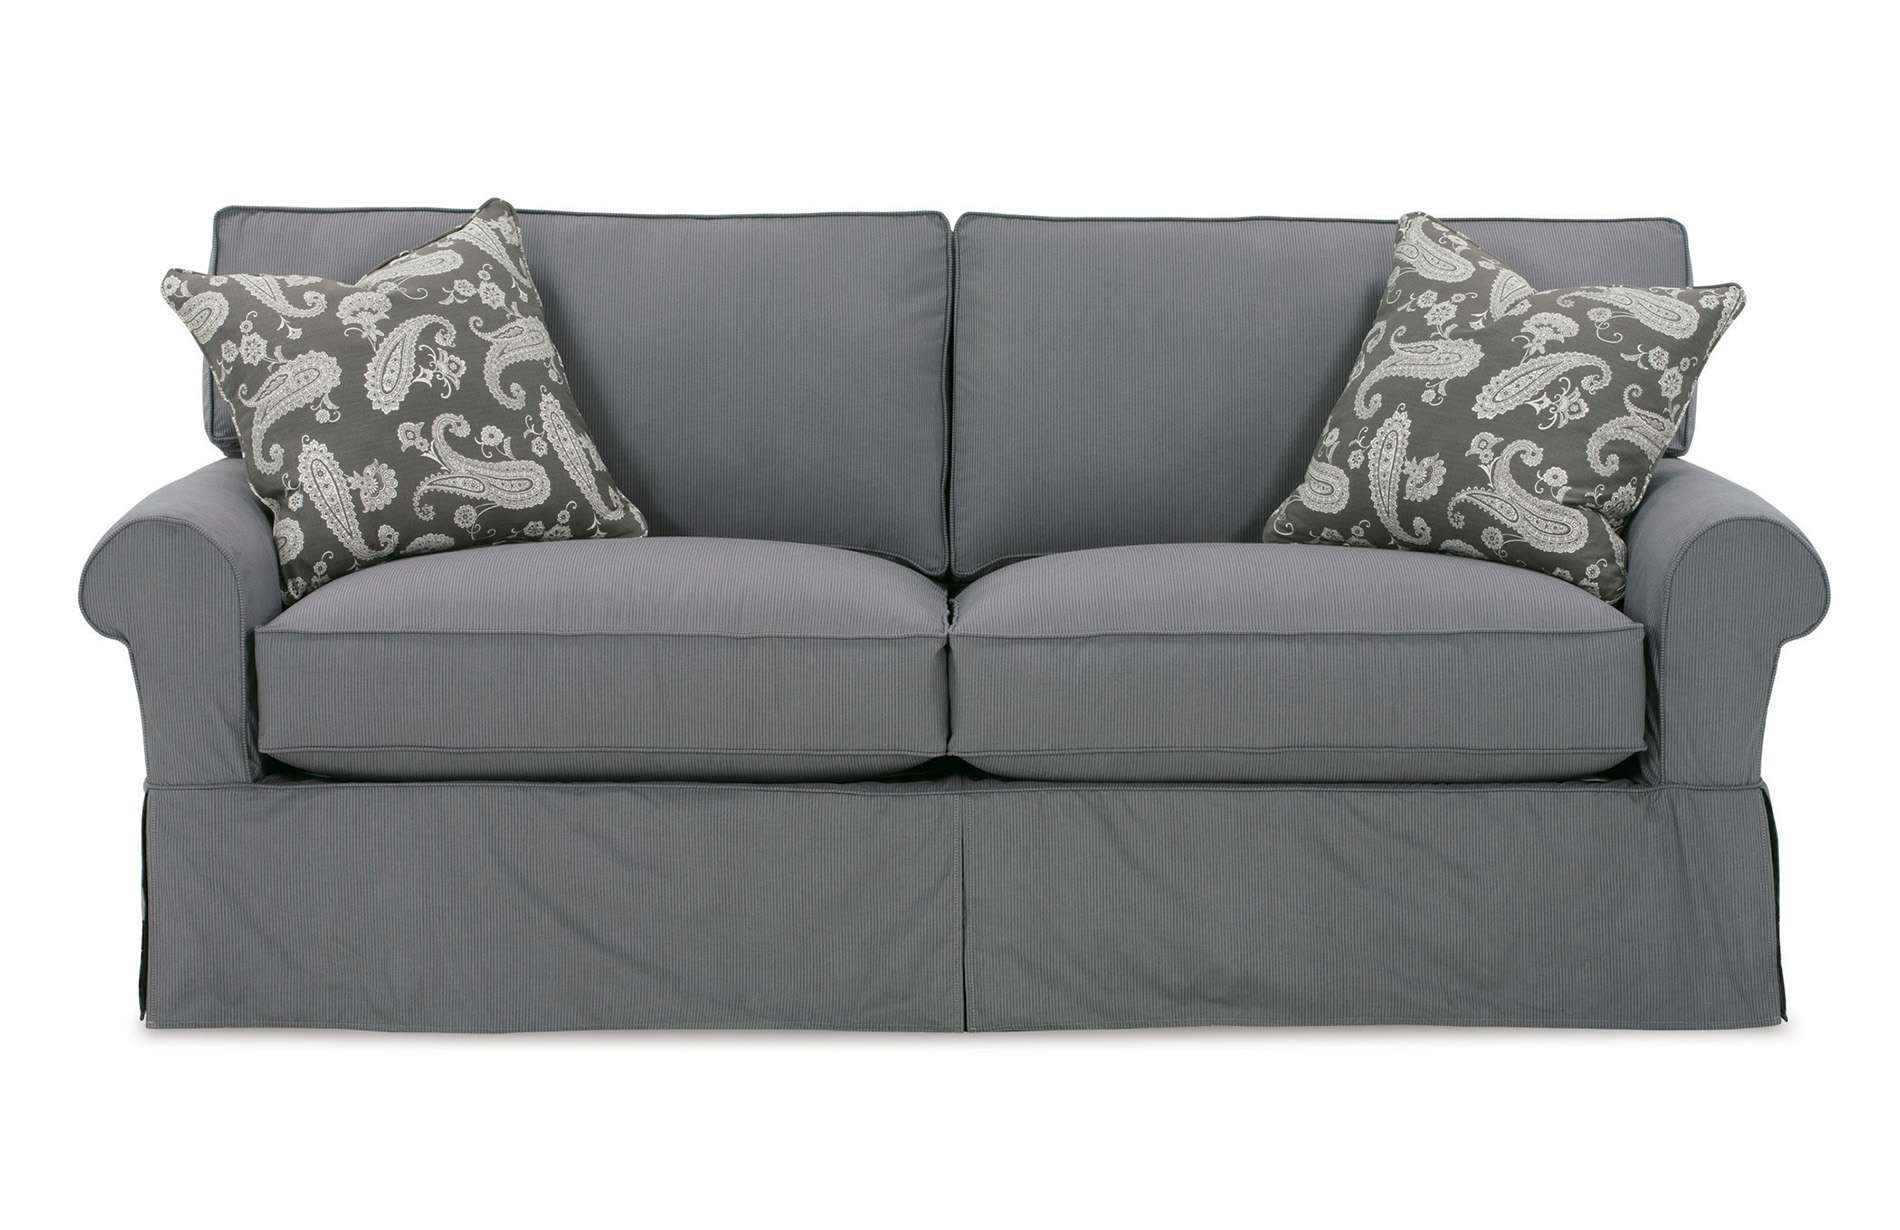 queen size sofa bed slipcover